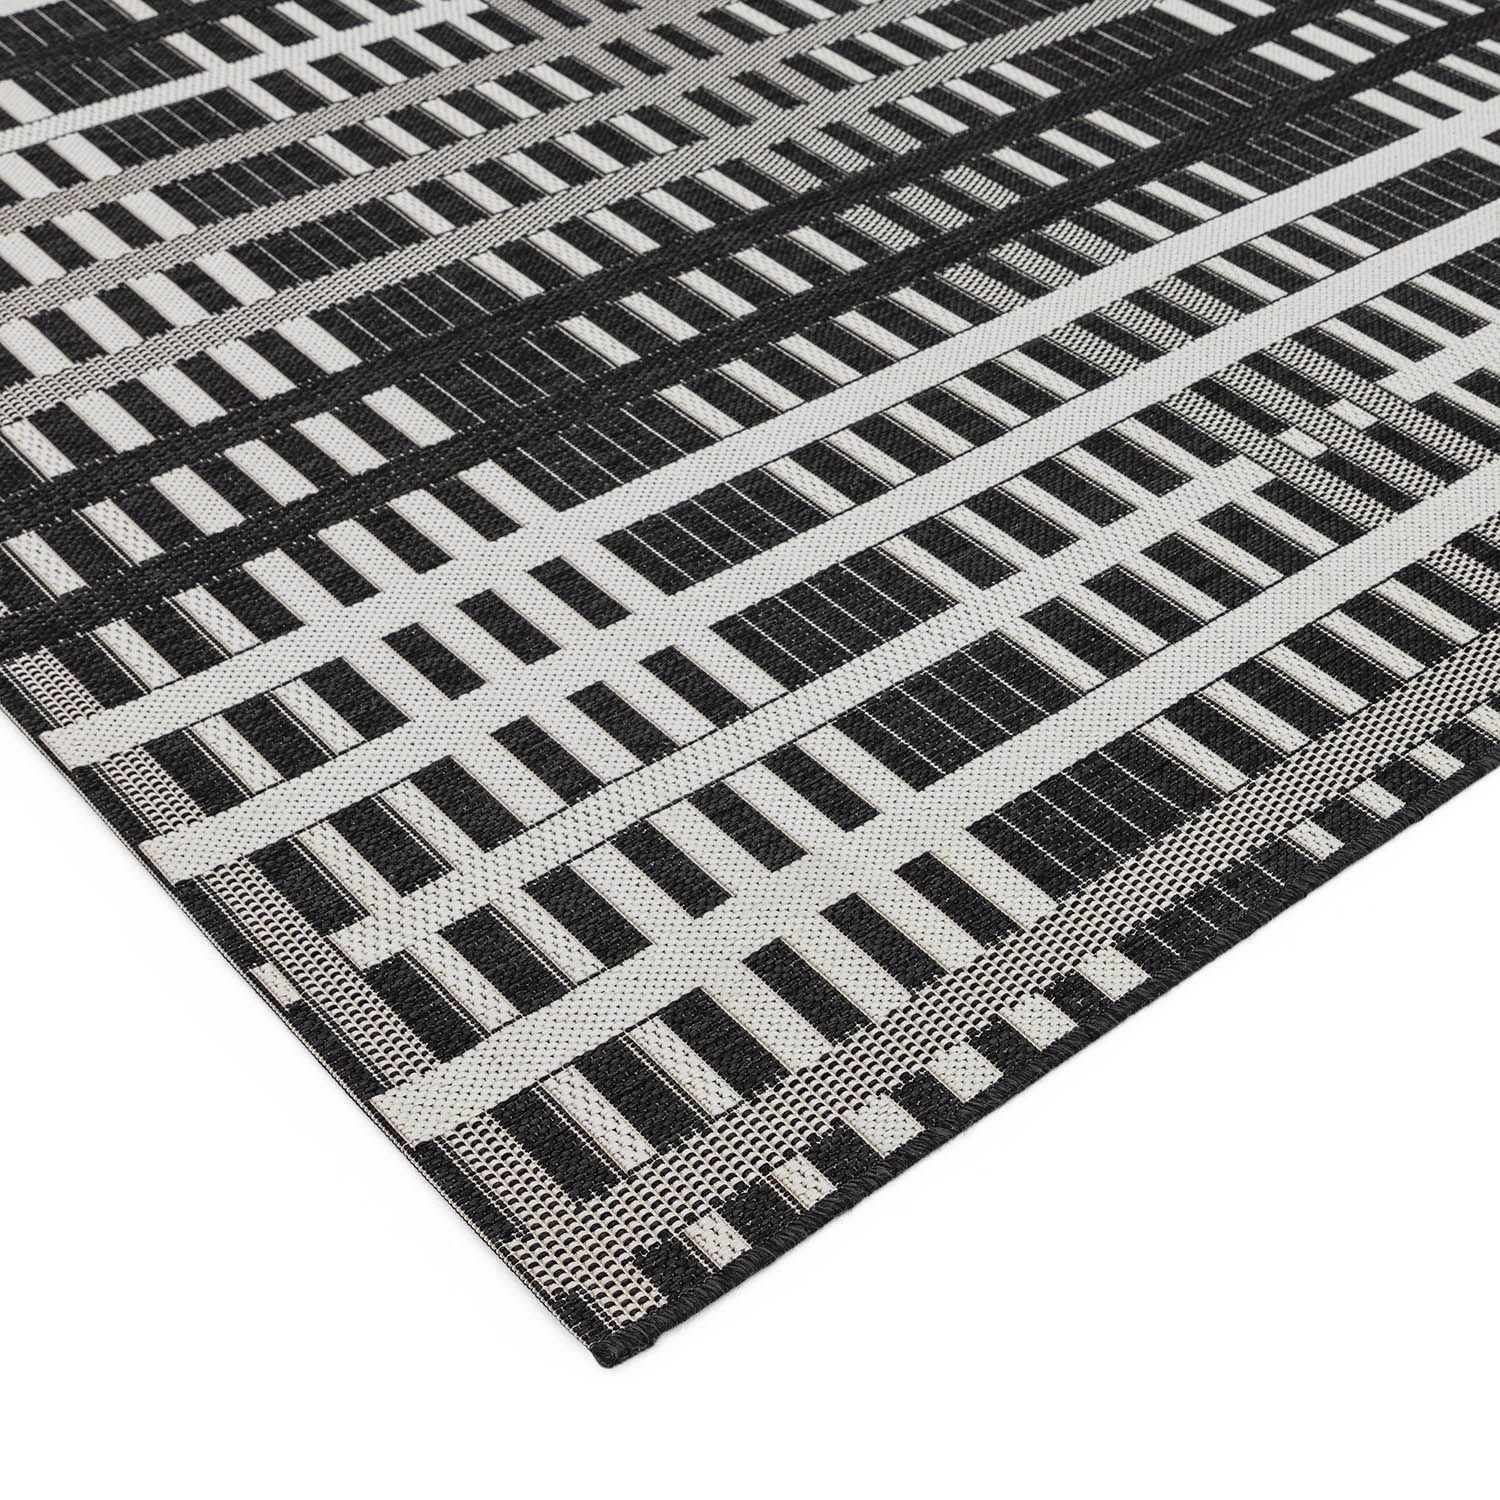 Patio Black Grid Rug | Carpetright Pertaining To Black Outdoor Rugs (View 15 of 15)